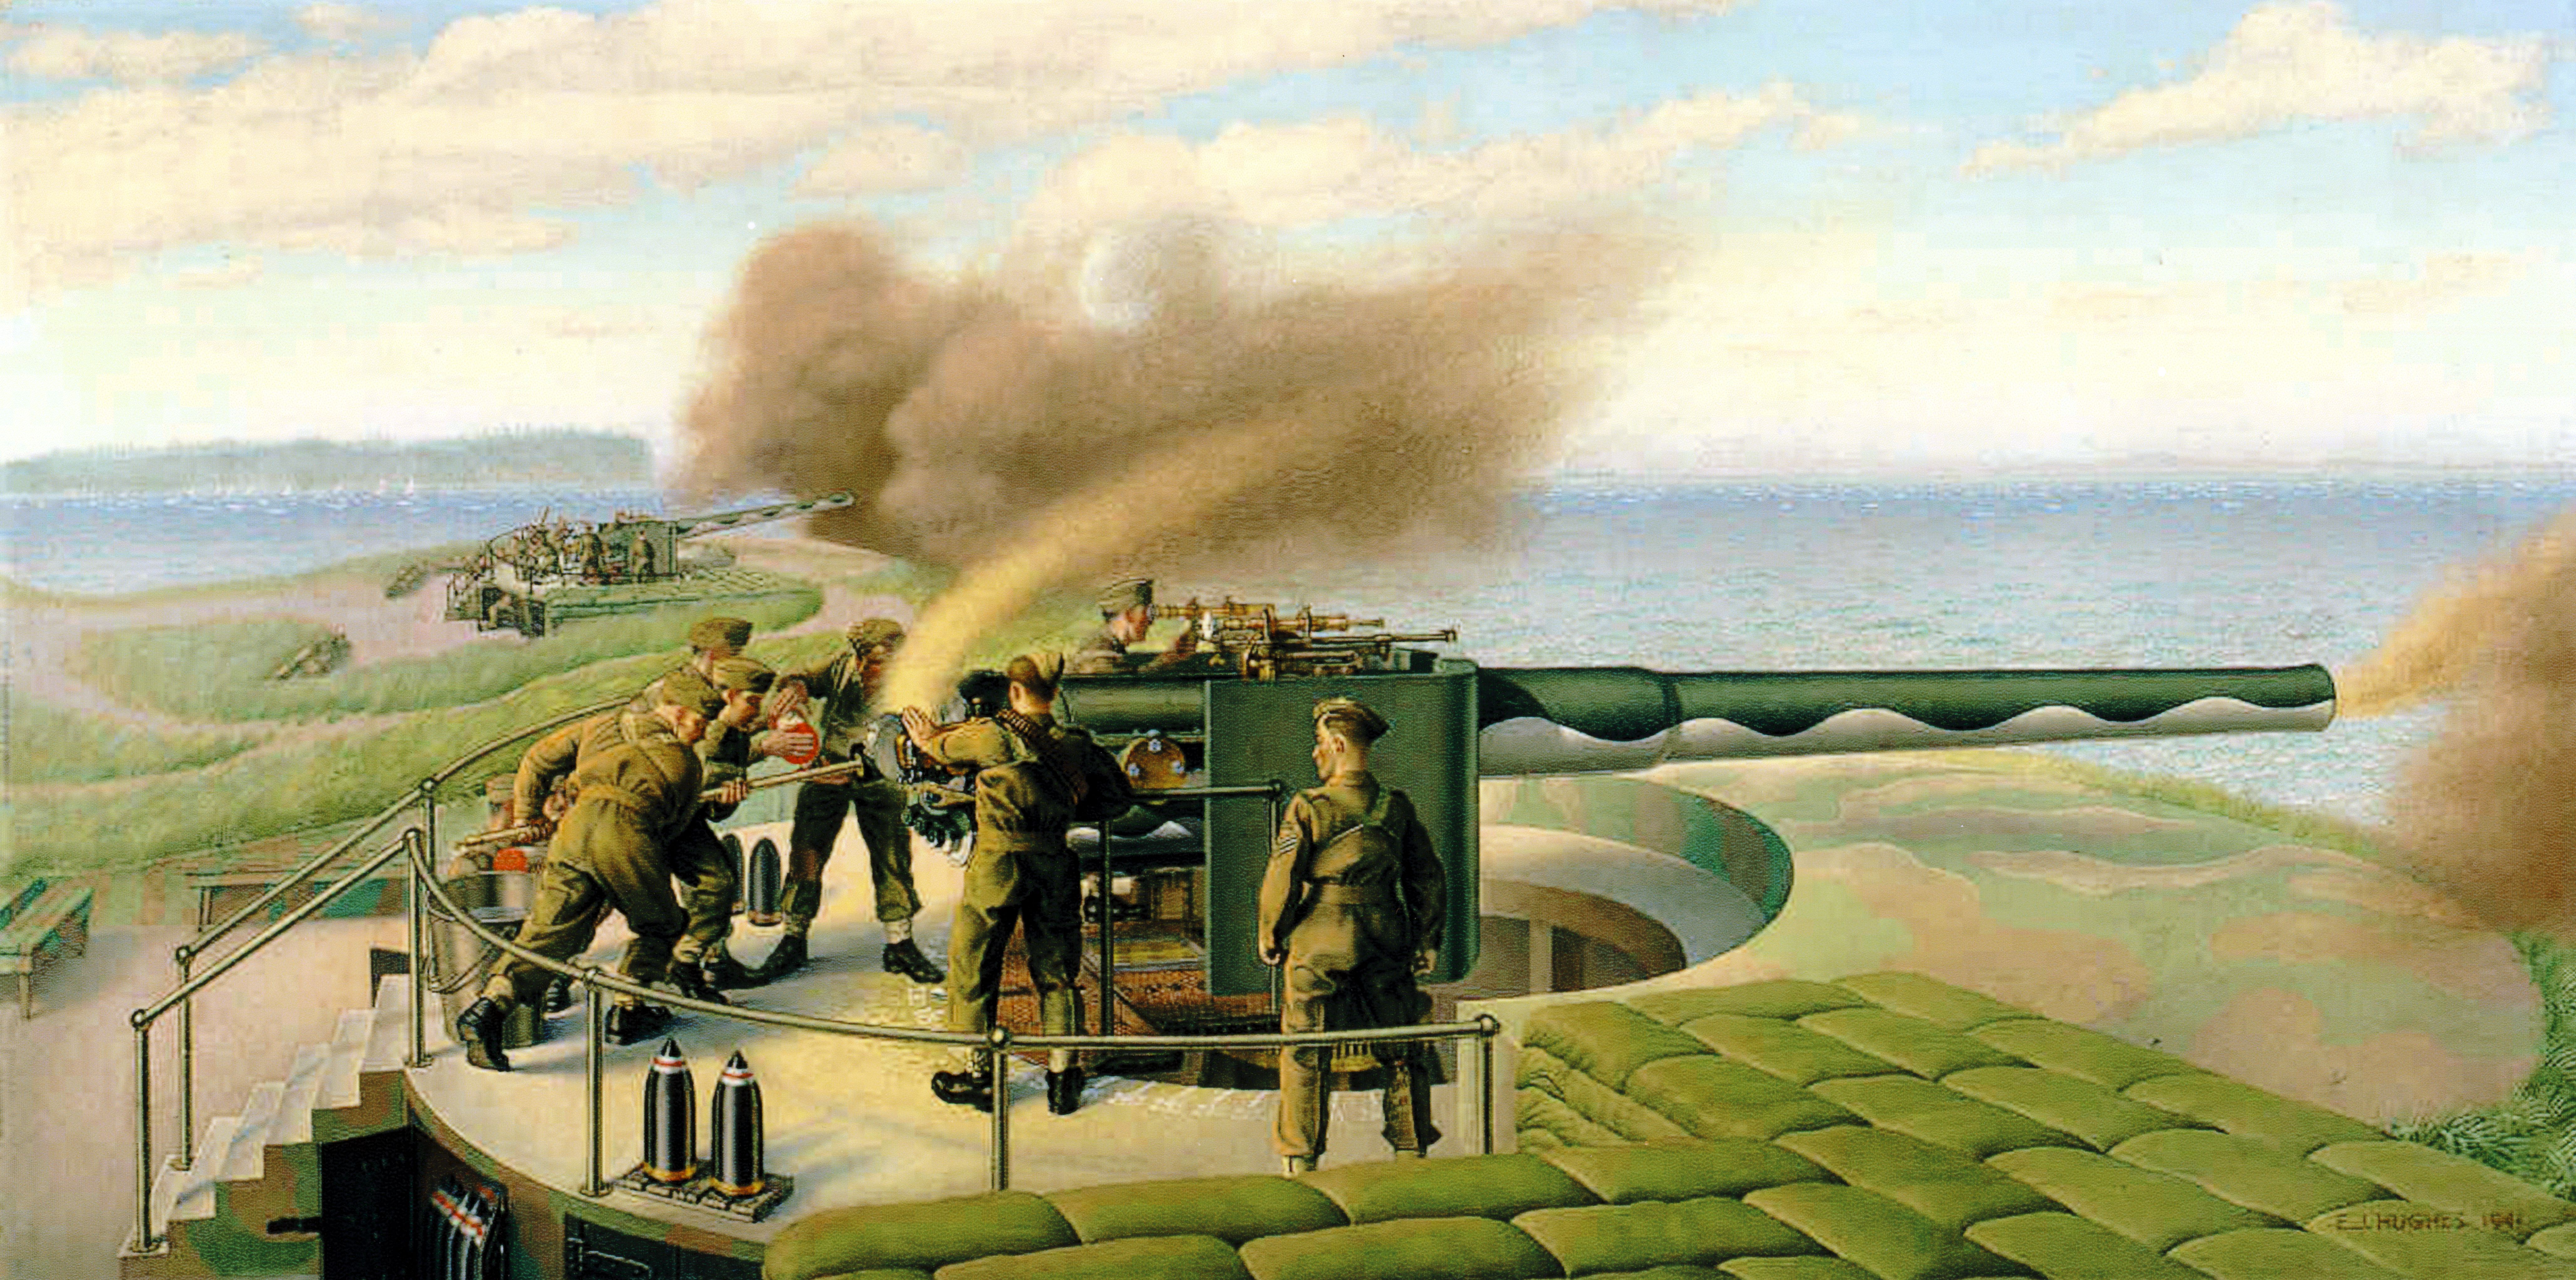 A painting depicting seven soldiers operating a large cannon along the sea coast.